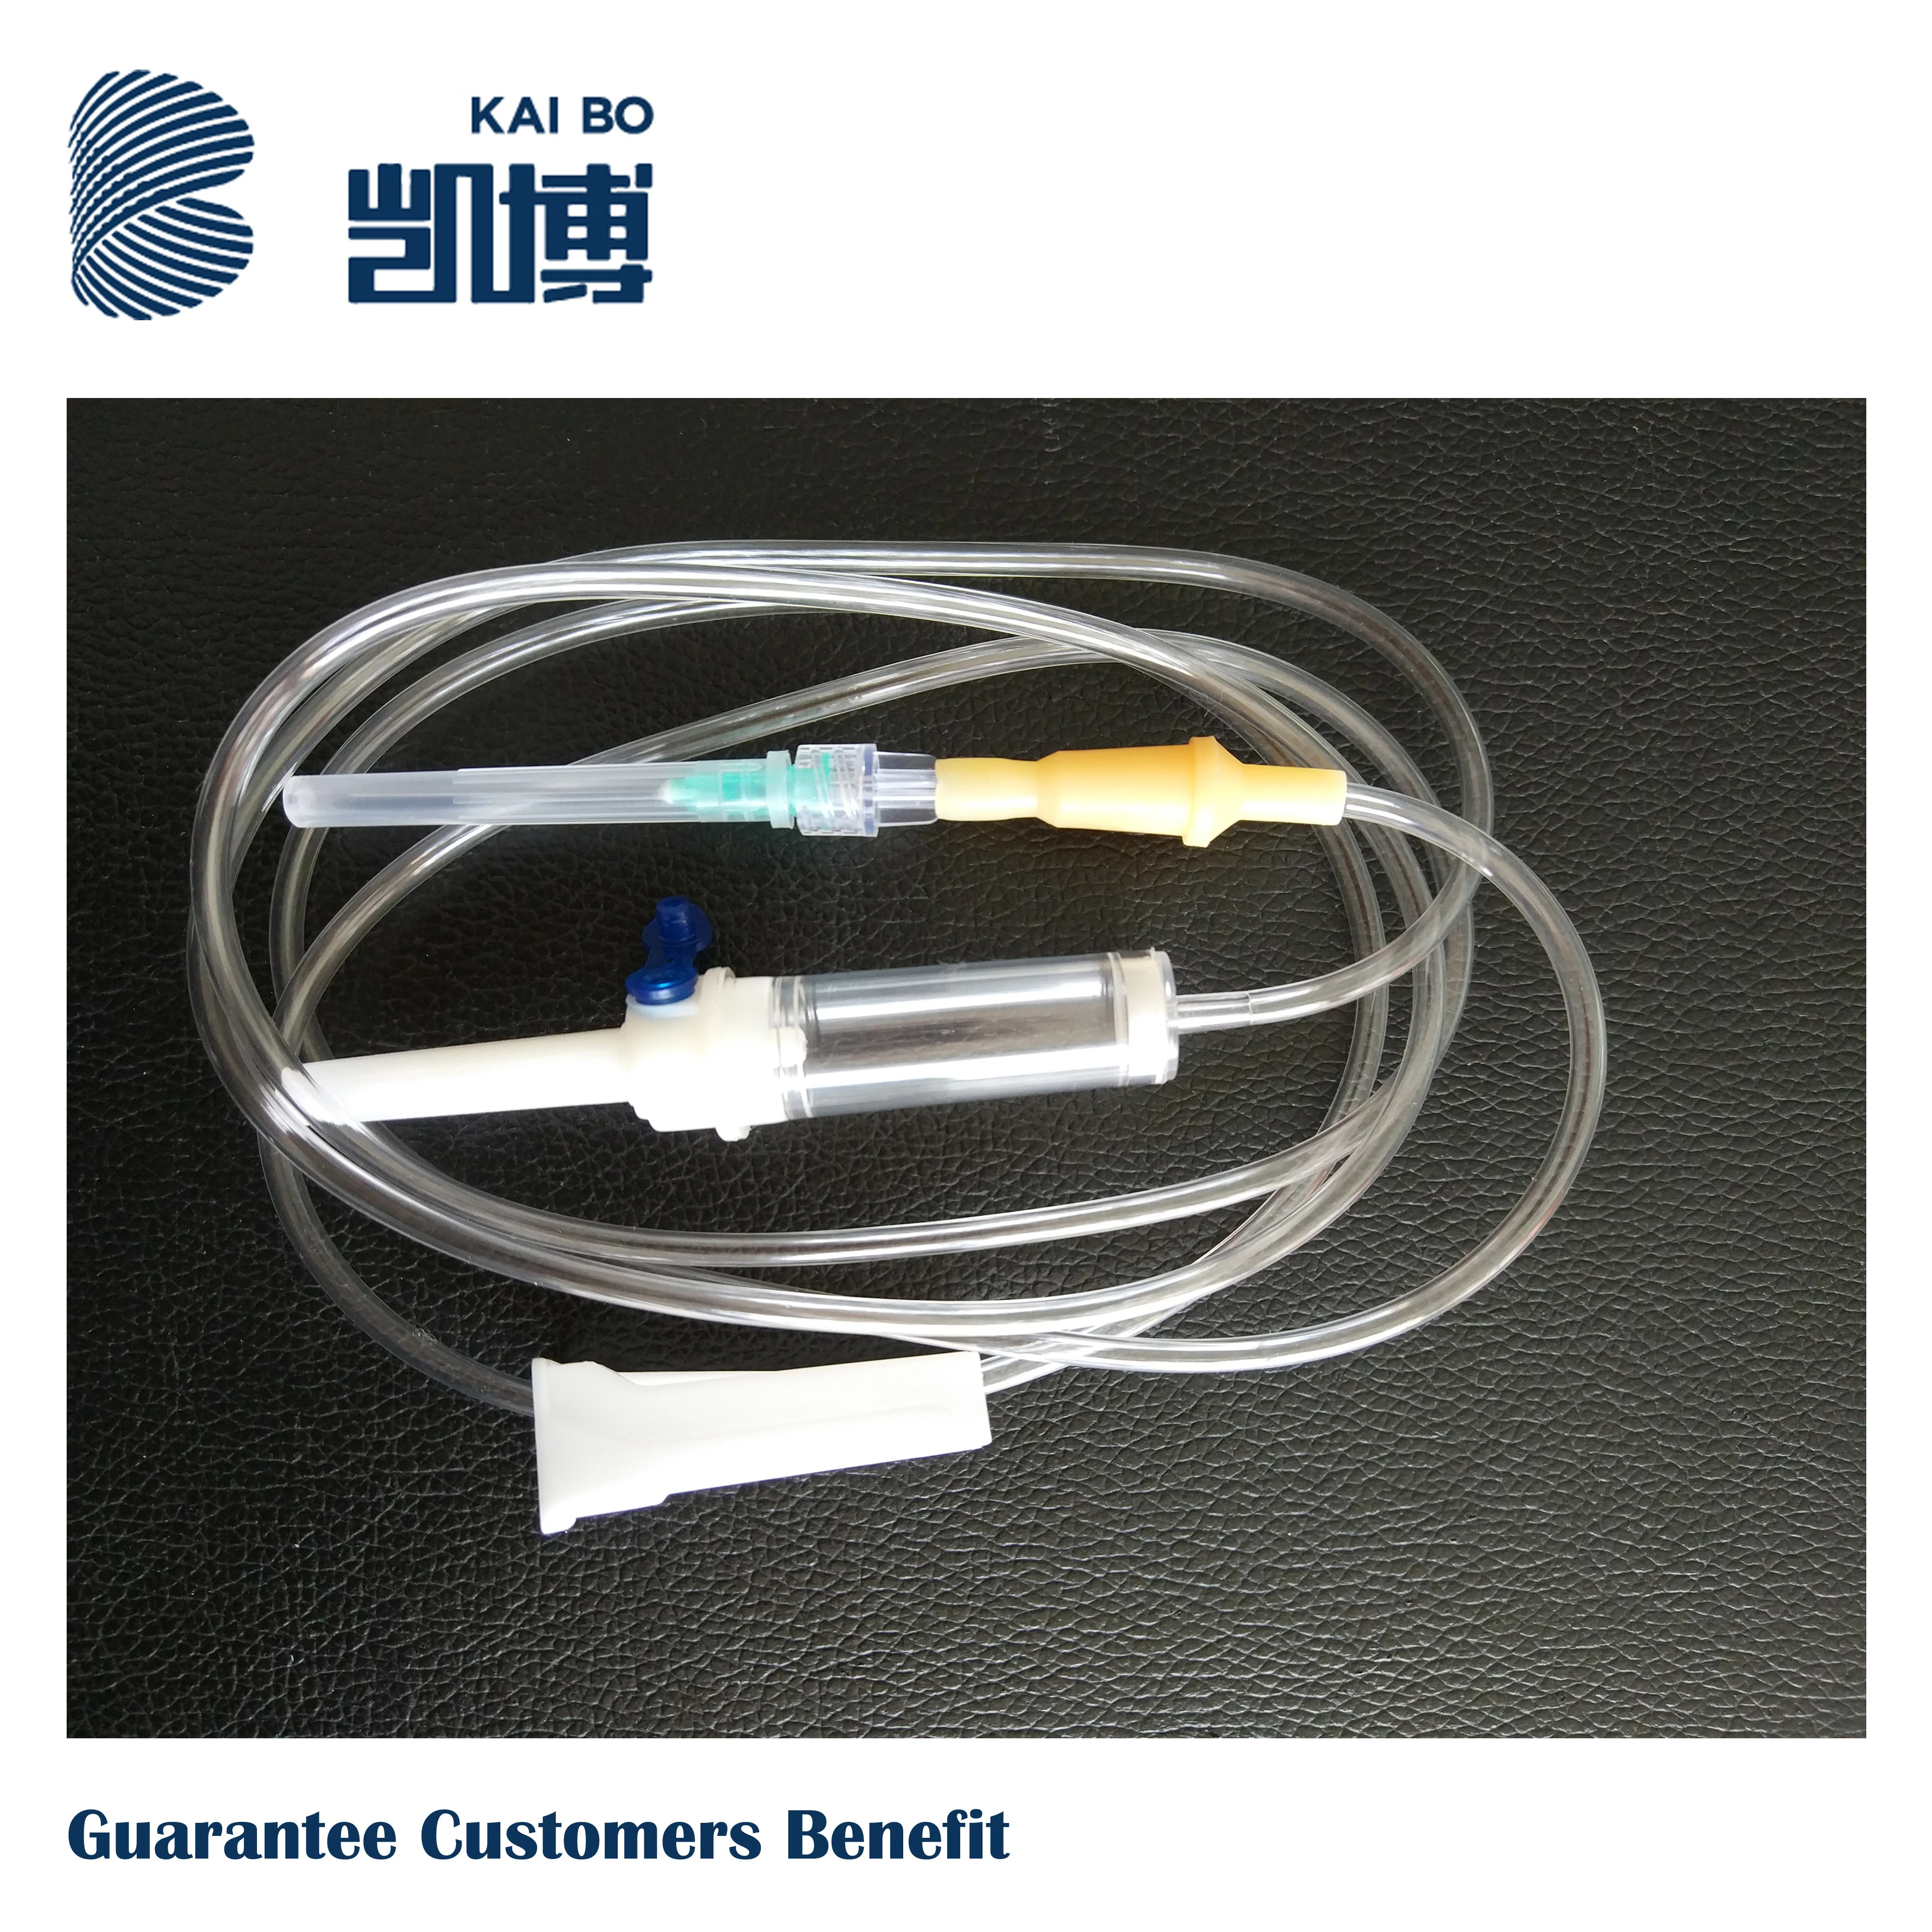 Medical IV Infusion Catheter Tube Sets Manufacturing infusion system Assembly machine and Production Lines